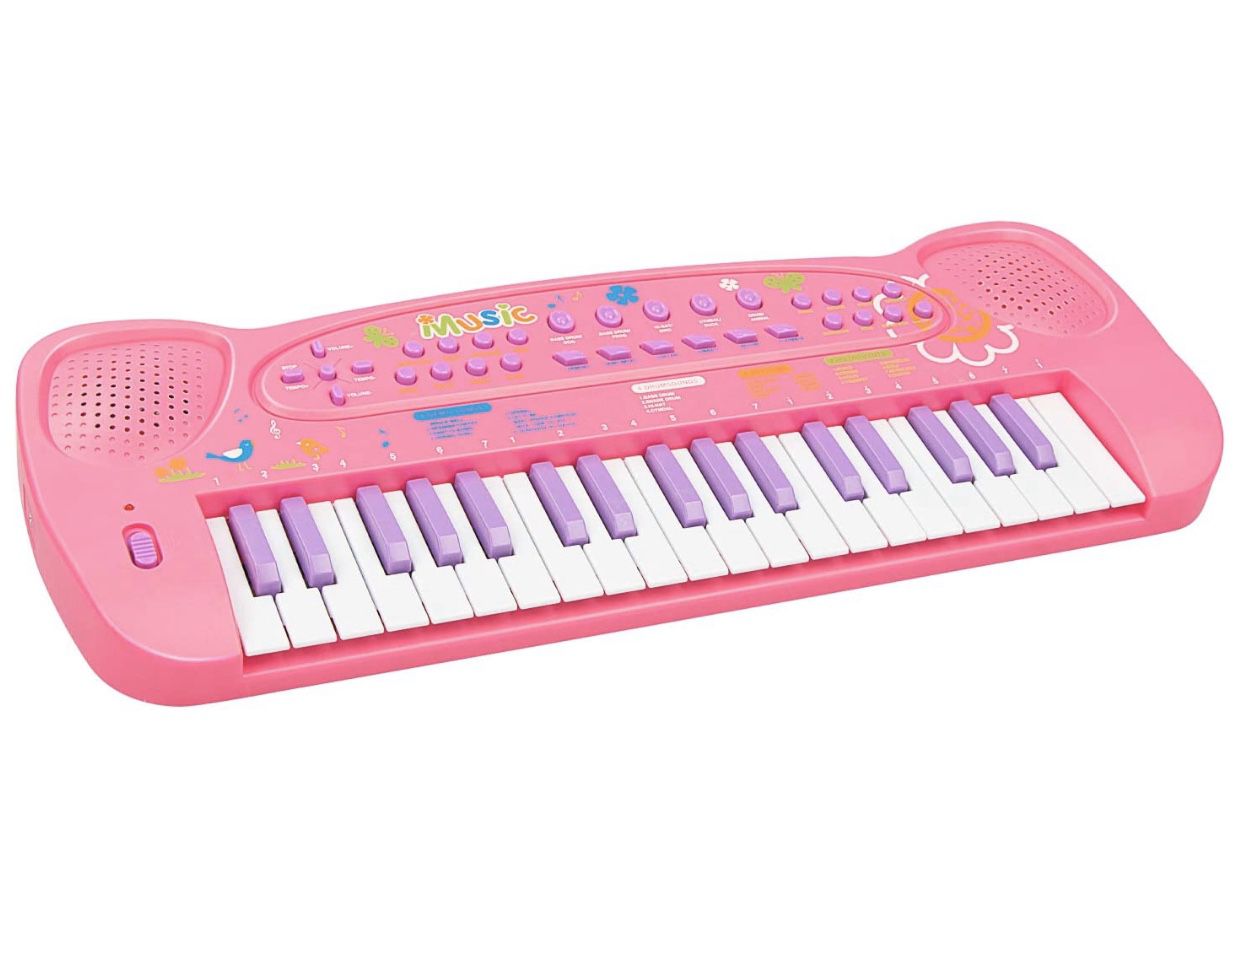 37 Keys Piano Keyboard for Kids Multifunction Portable Piano Electronic Keyboard Music Instrument for Kids Early Learning Educational Toy for 3-10 Ye